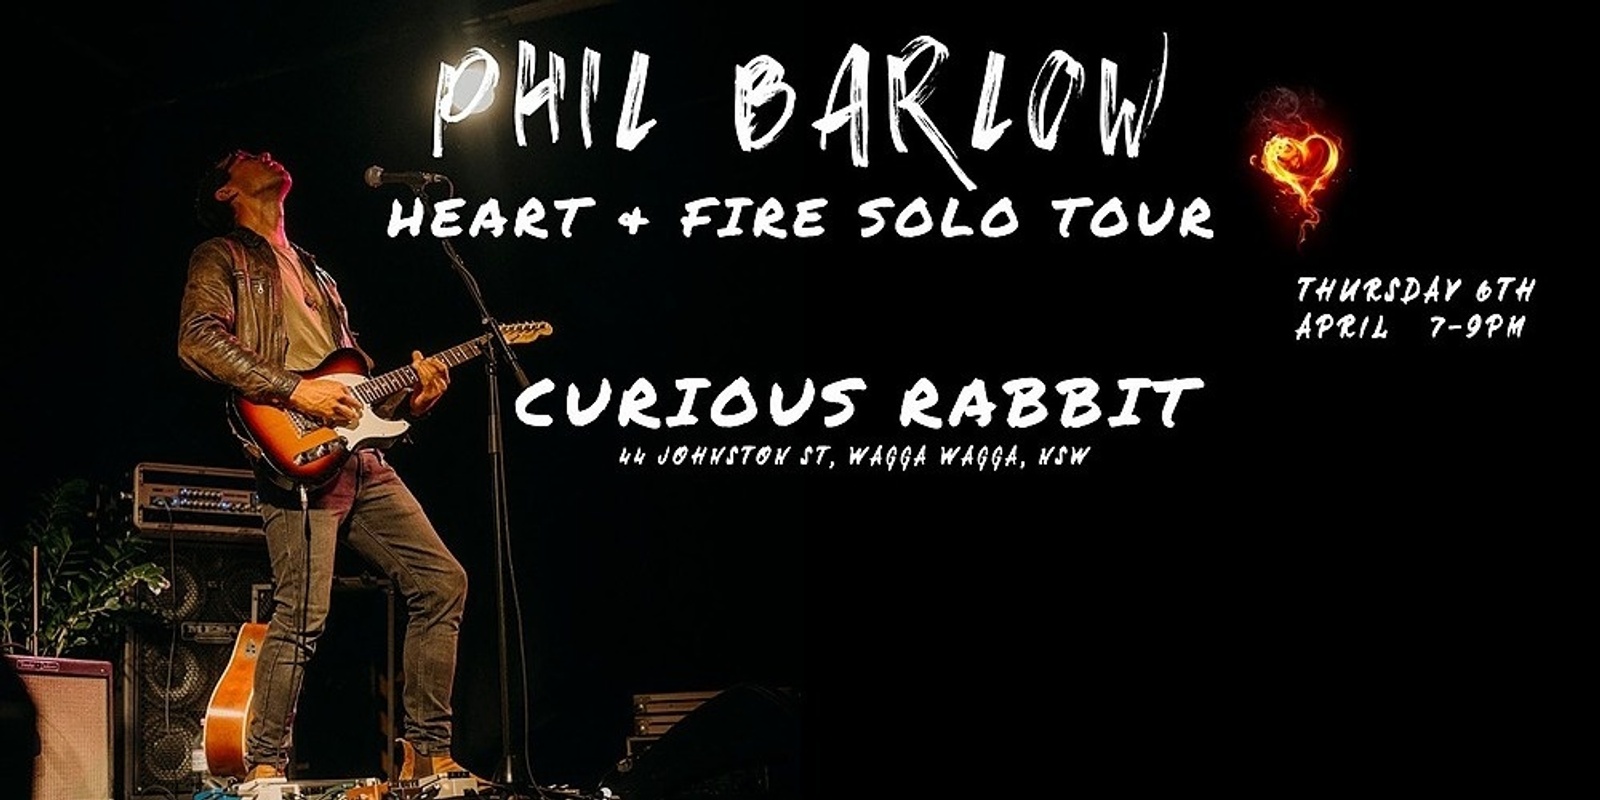 Banner image for Phil Barlow Live at The Curious Rabbit